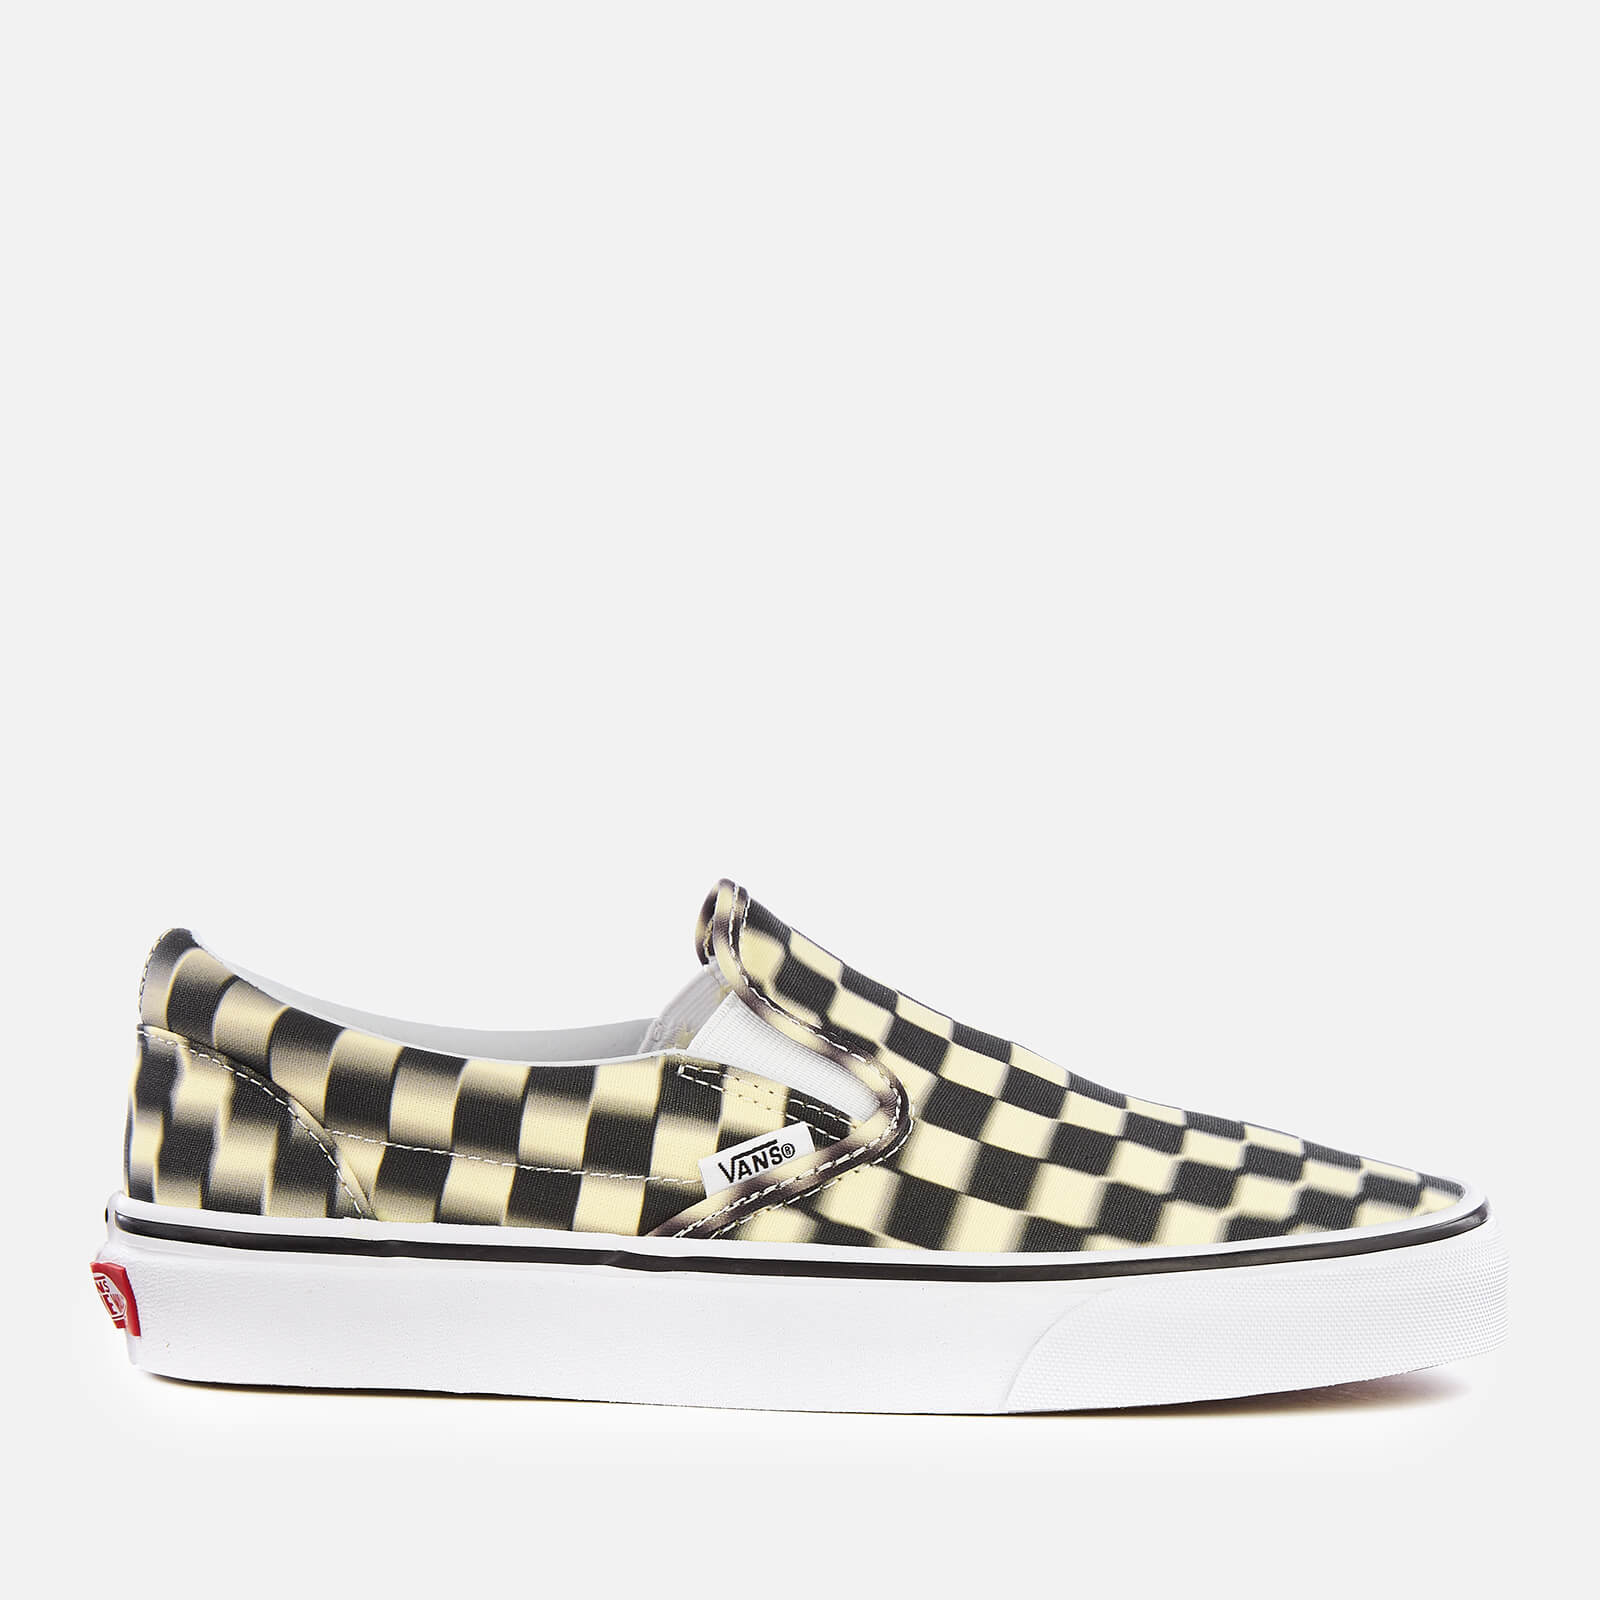 vans classic slip on trainers in black check